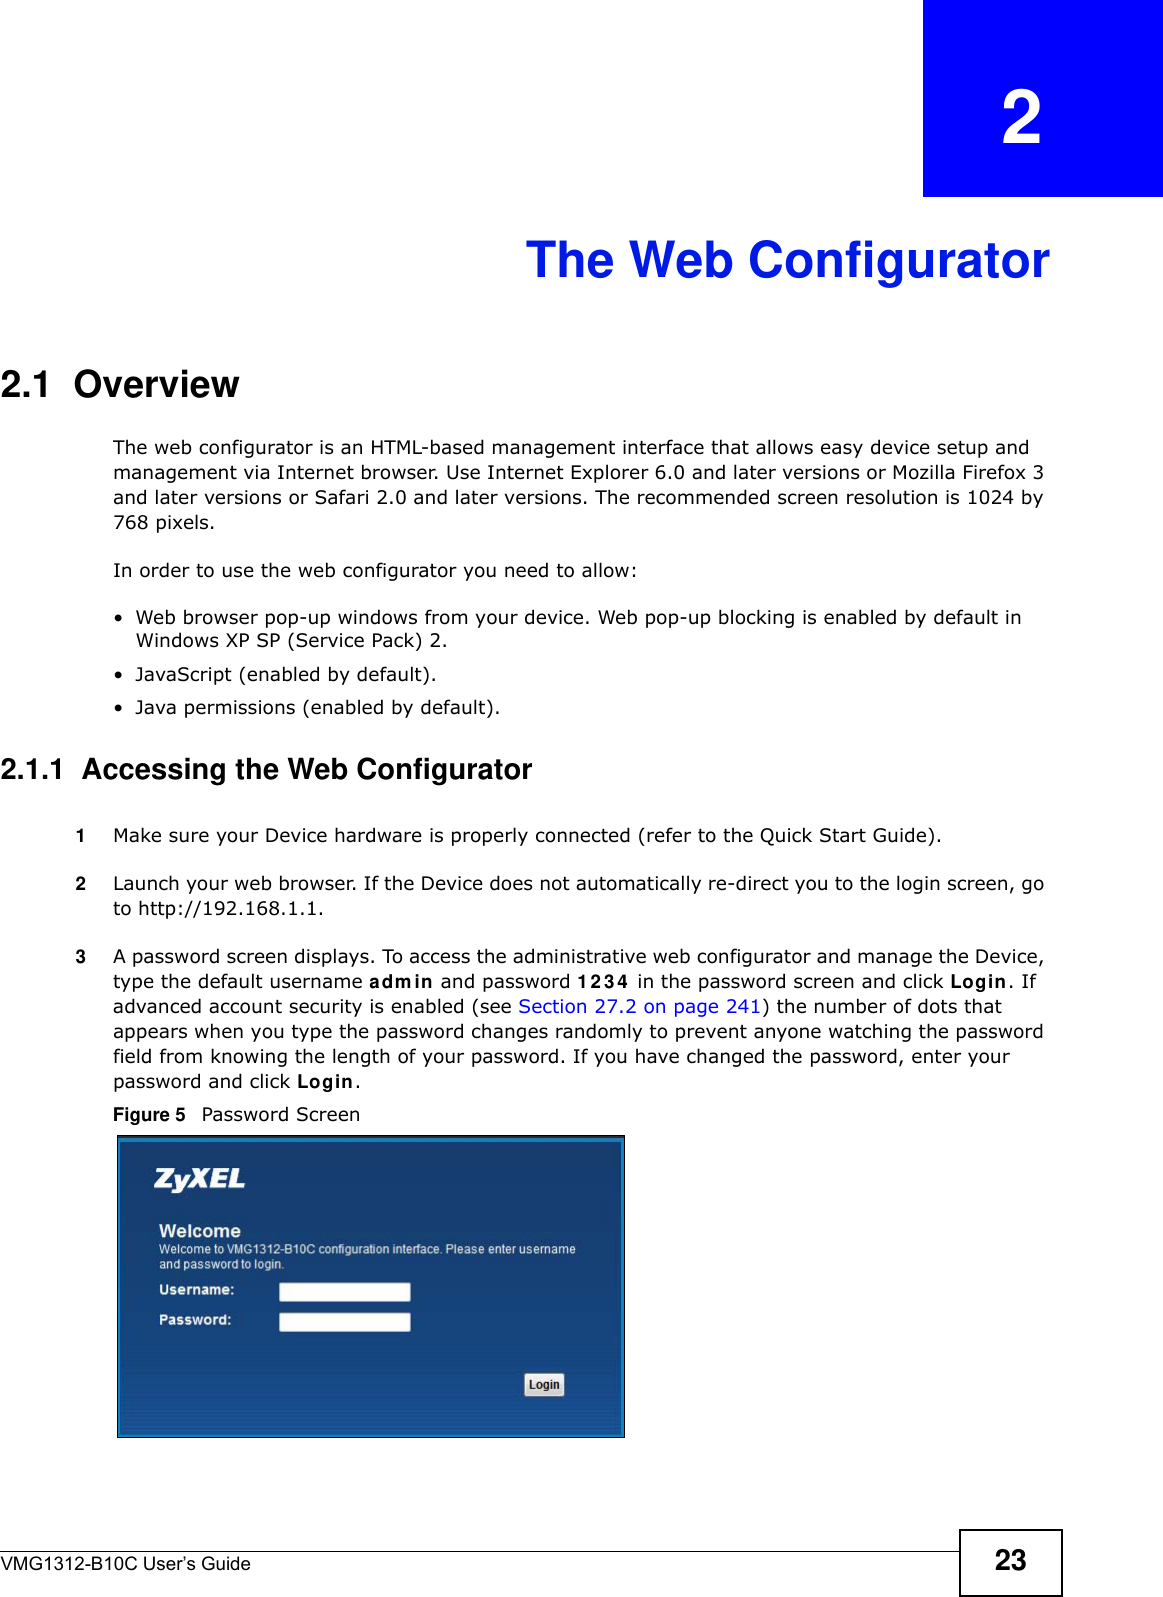 VMG1312-B10C User’s Guide 23CHAPTER   2The Web Configurator2.1  OverviewThe web configurator is an HTML-based management interface that allows easy device setup and management via Internet browser. Use Internet Explorer 6.0 and later versions or Mozilla Firefox 3 and later versions or Safari 2.0 and later versions. The recommended screen resolution is 1024 by 768 pixels.In order to use the web configurator you need to allow:• Web browser pop-up windows from your device. Web pop-up blocking is enabled by default in Windows XP SP (Service Pack) 2.• JavaScript (enabled by default).• Java permissions (enabled by default).2.1.1  Accessing the Web Configurator1Make sure your Device hardware is properly connected (refer to the Quick Start Guide).2Launch your web browser. If the Device does not automatically re-direct you to the login screen, go to http://192.168.1.1.3A password screen displays. To access the administrative web configurator and manage the Device, type the default username adm in and password 1 2 3 4  in the password screen and click Login. If advanced account security is enabled (see Section 27.2 on page 241) the number of dots that appears when you type the password changes randomly to prevent anyone watching the password field from knowing the length of your password. If you have changed the password, enter your password and click Login. Figure 5   Password Screen